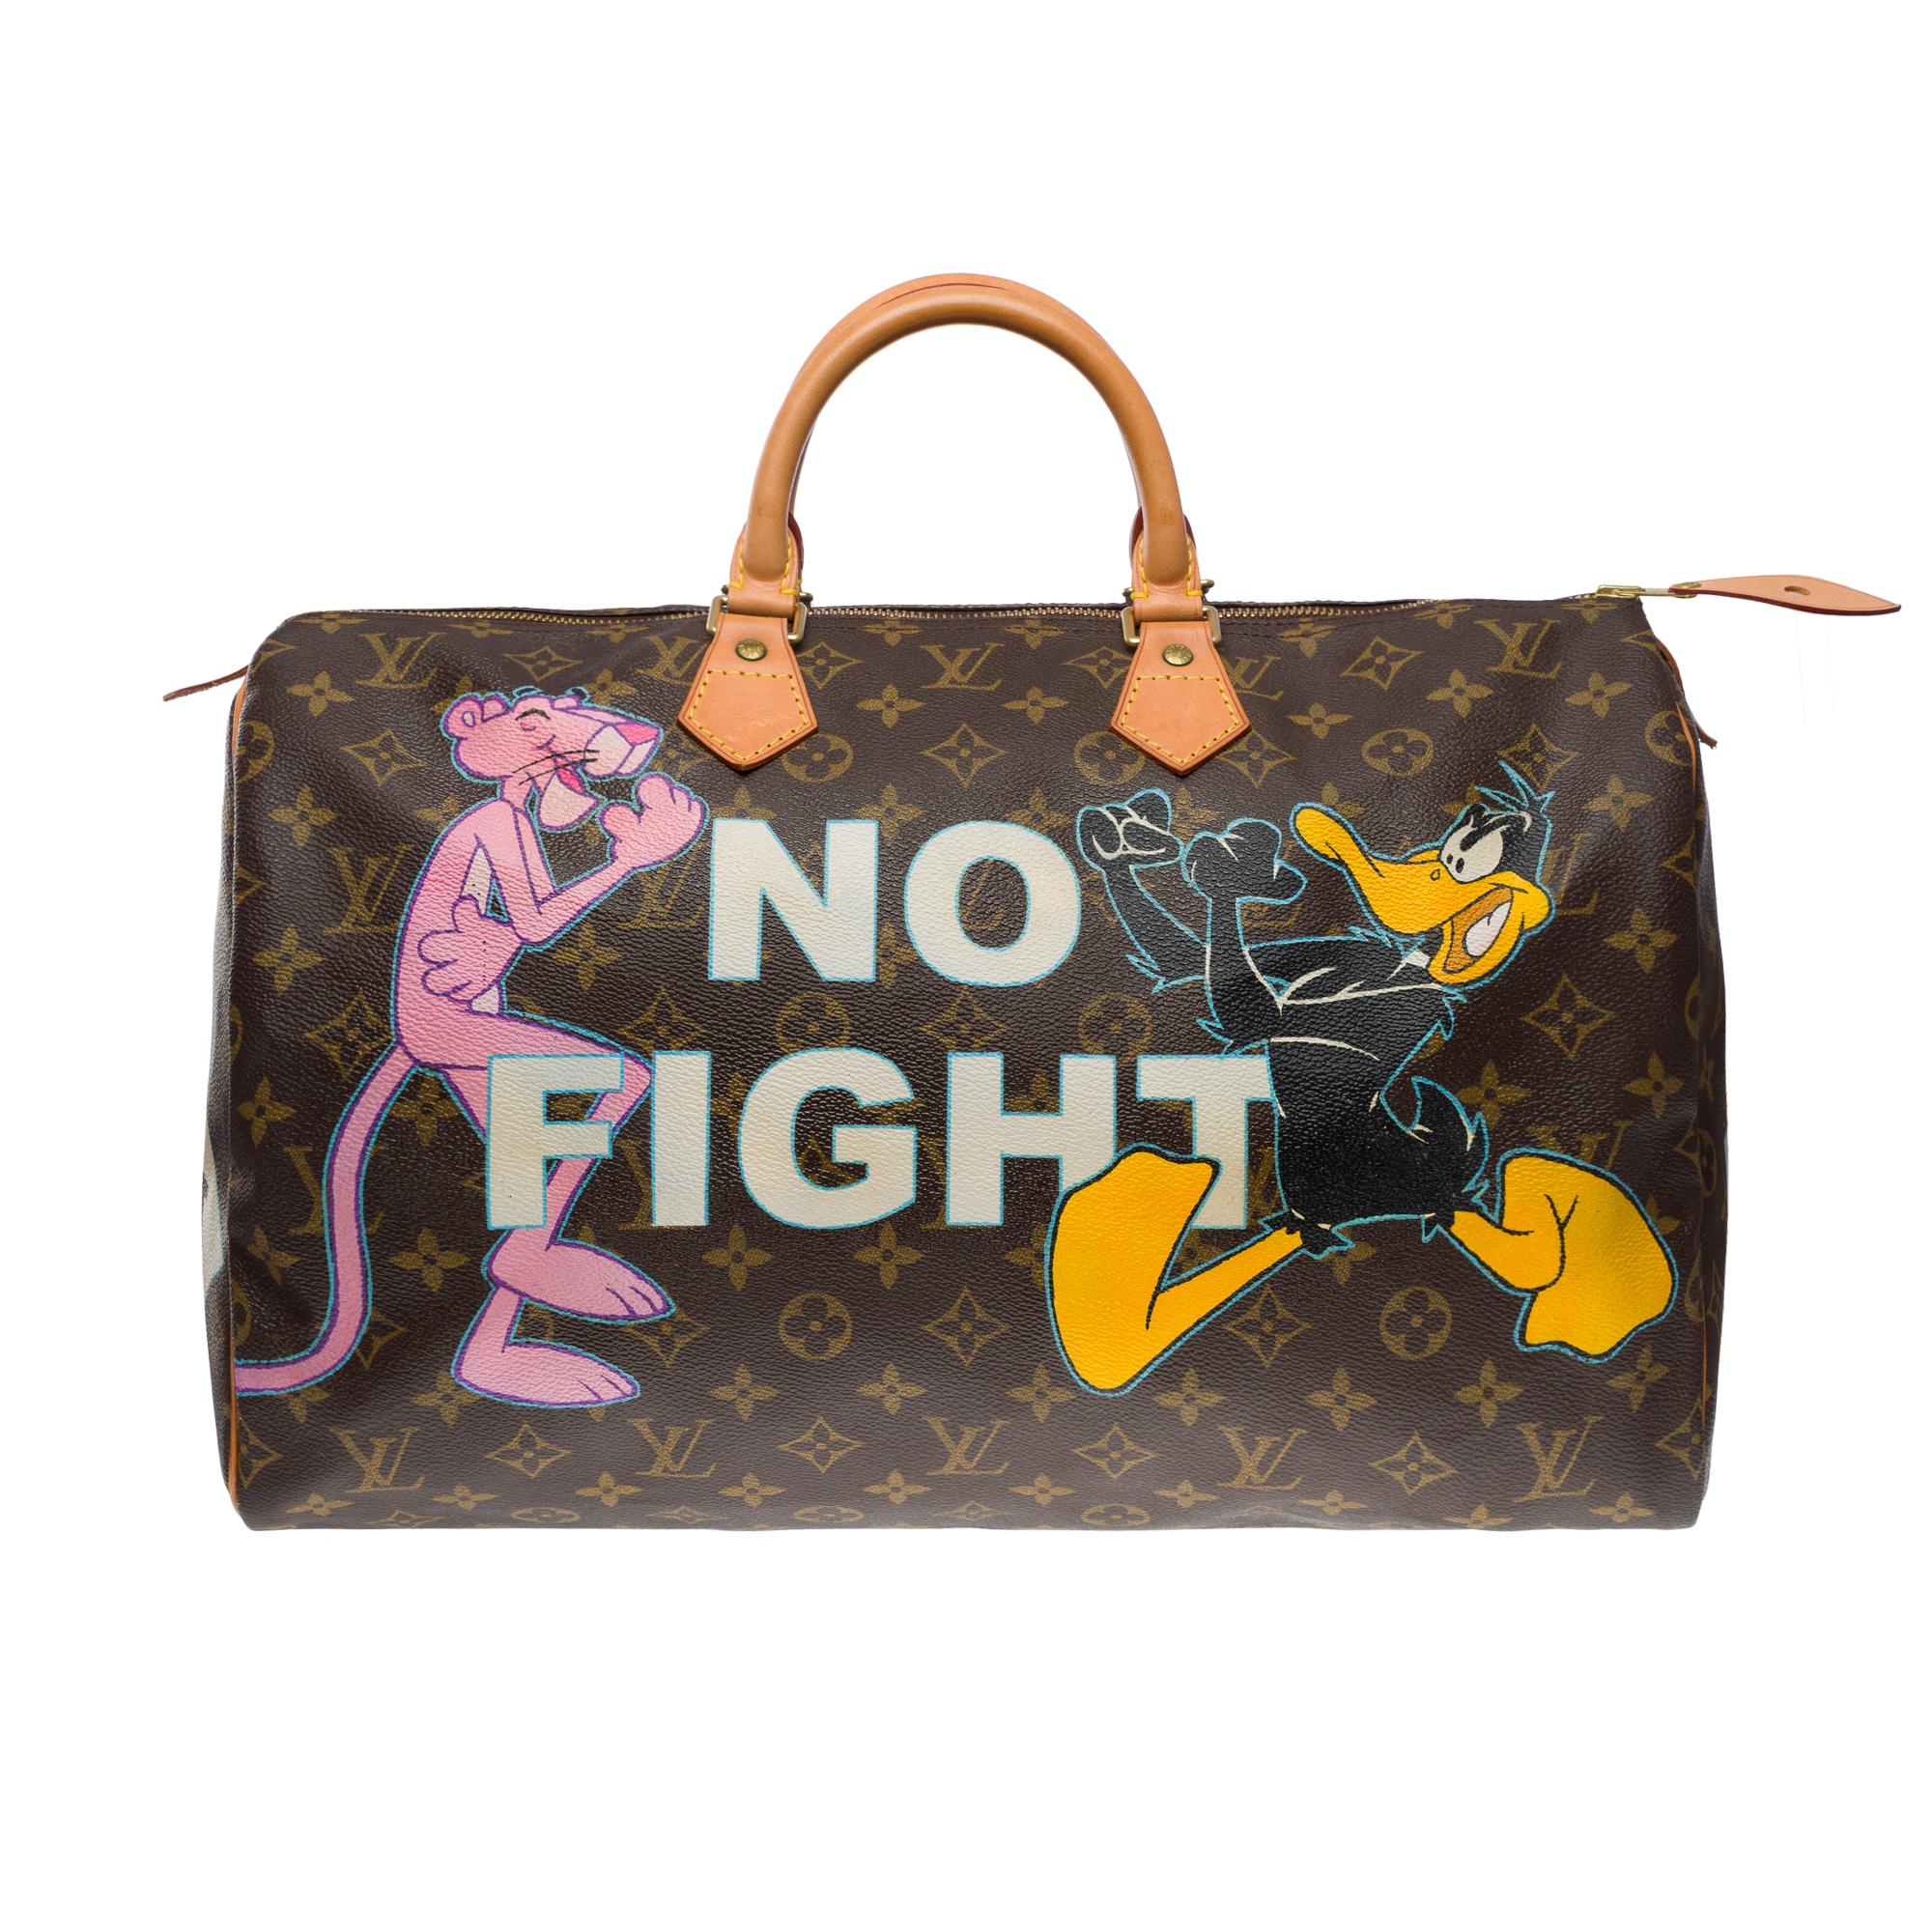 Louis Vuitton Speedy 40 handbag in Monogram canvas customized by the fashionable artist of Street Art PatBo with his work 